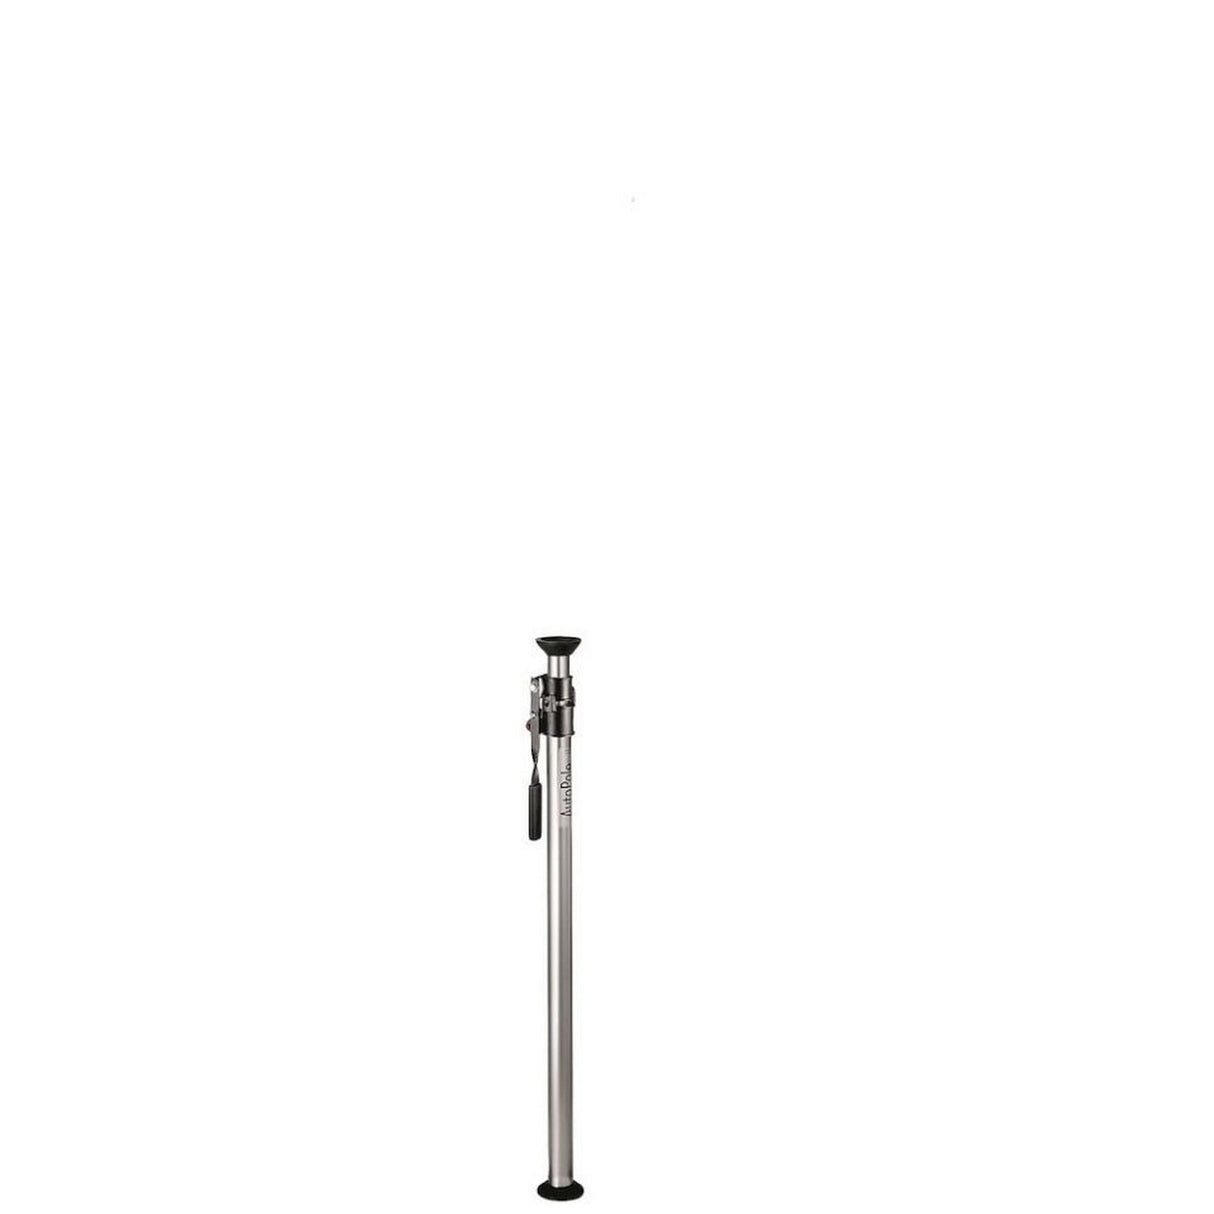 Manfrotto 077 Single Autopole, Extends from 39.4-67 Inches